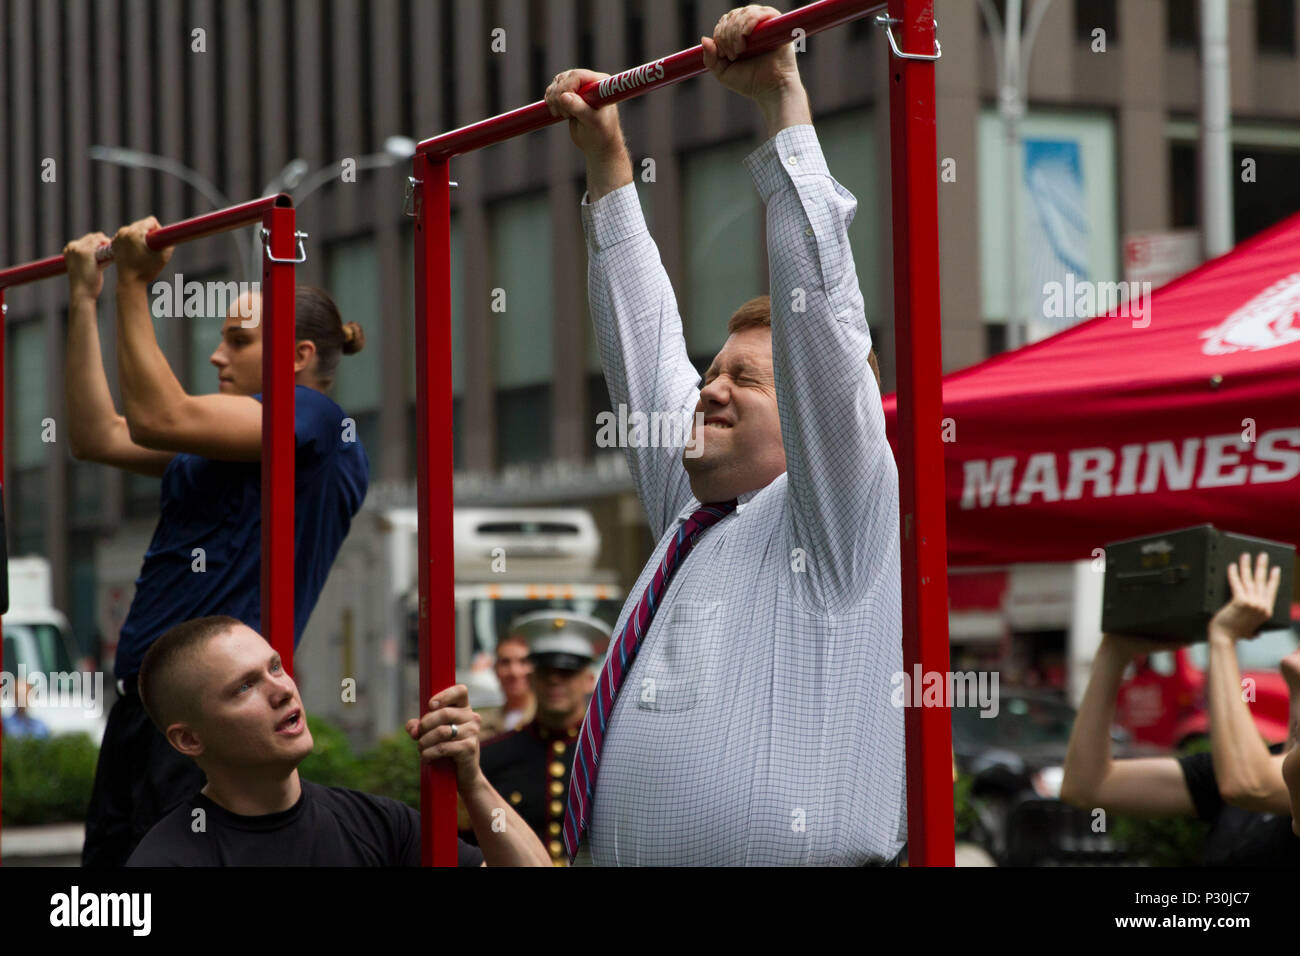 Frank Luntz, a political consultant with Fox News, attempts the pull-up challenge outside of the Fox News building in New York City, Aug. 17, 2016. The Marines visited Fox & Friends, a popular morning show, to demonstrate their commitment to female Marines and to the integration of women into combat military occupational specialties. Stock Photo